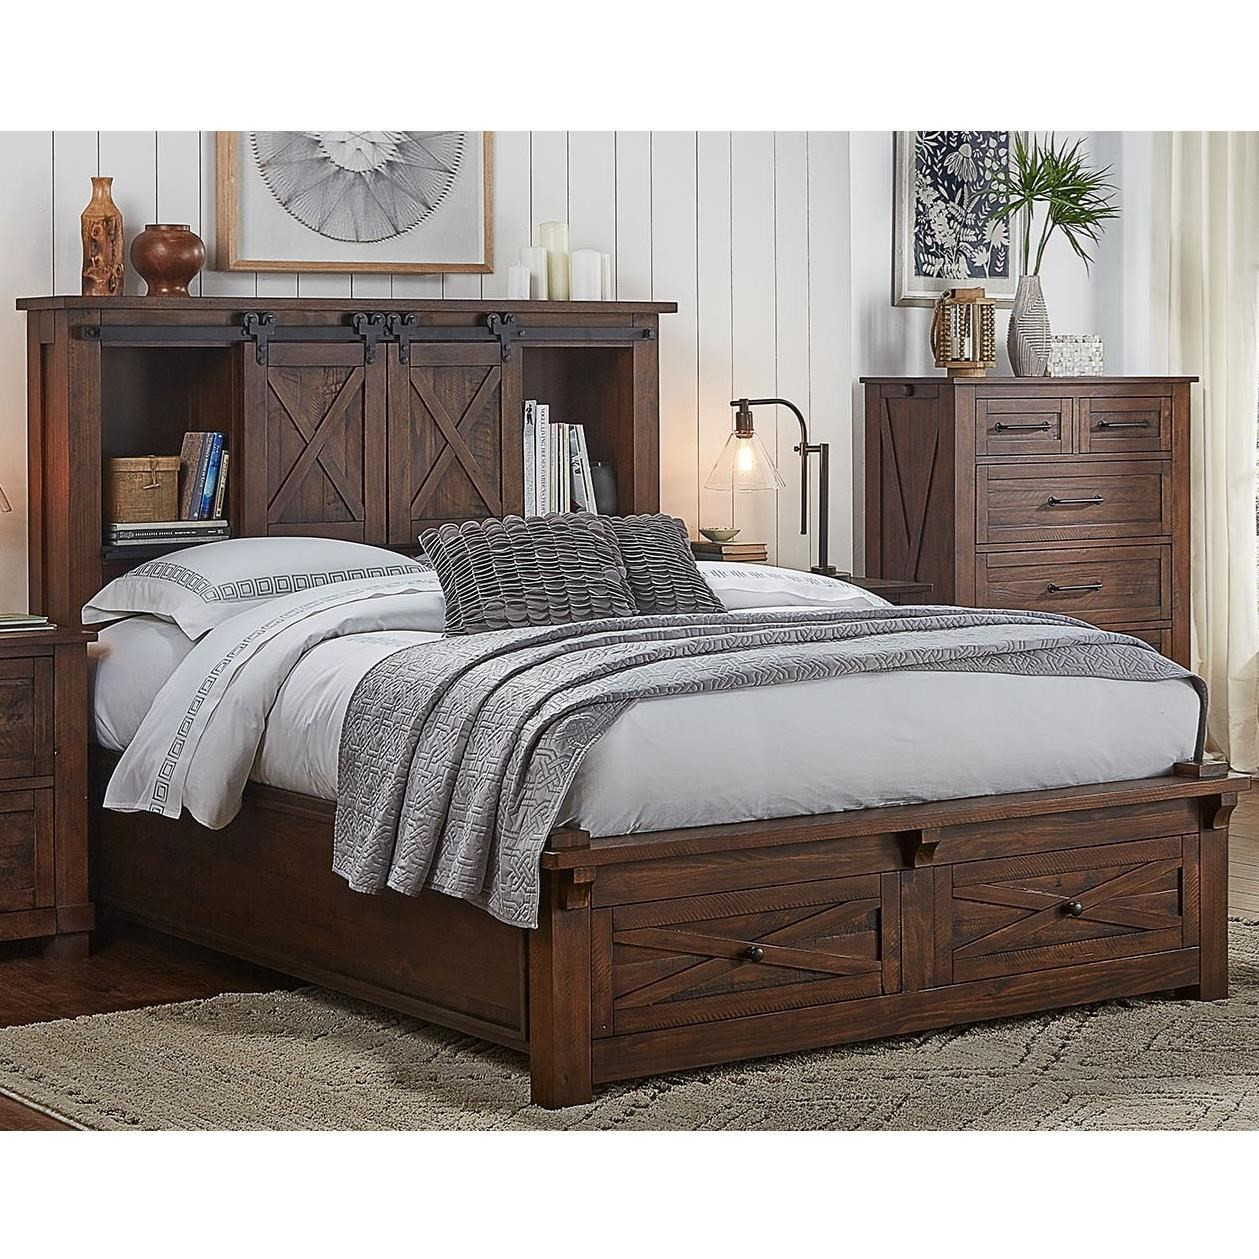 King Size Bed Storage Bench
 AAmerica Sun Valley King Storage Bed with Footboard Bench